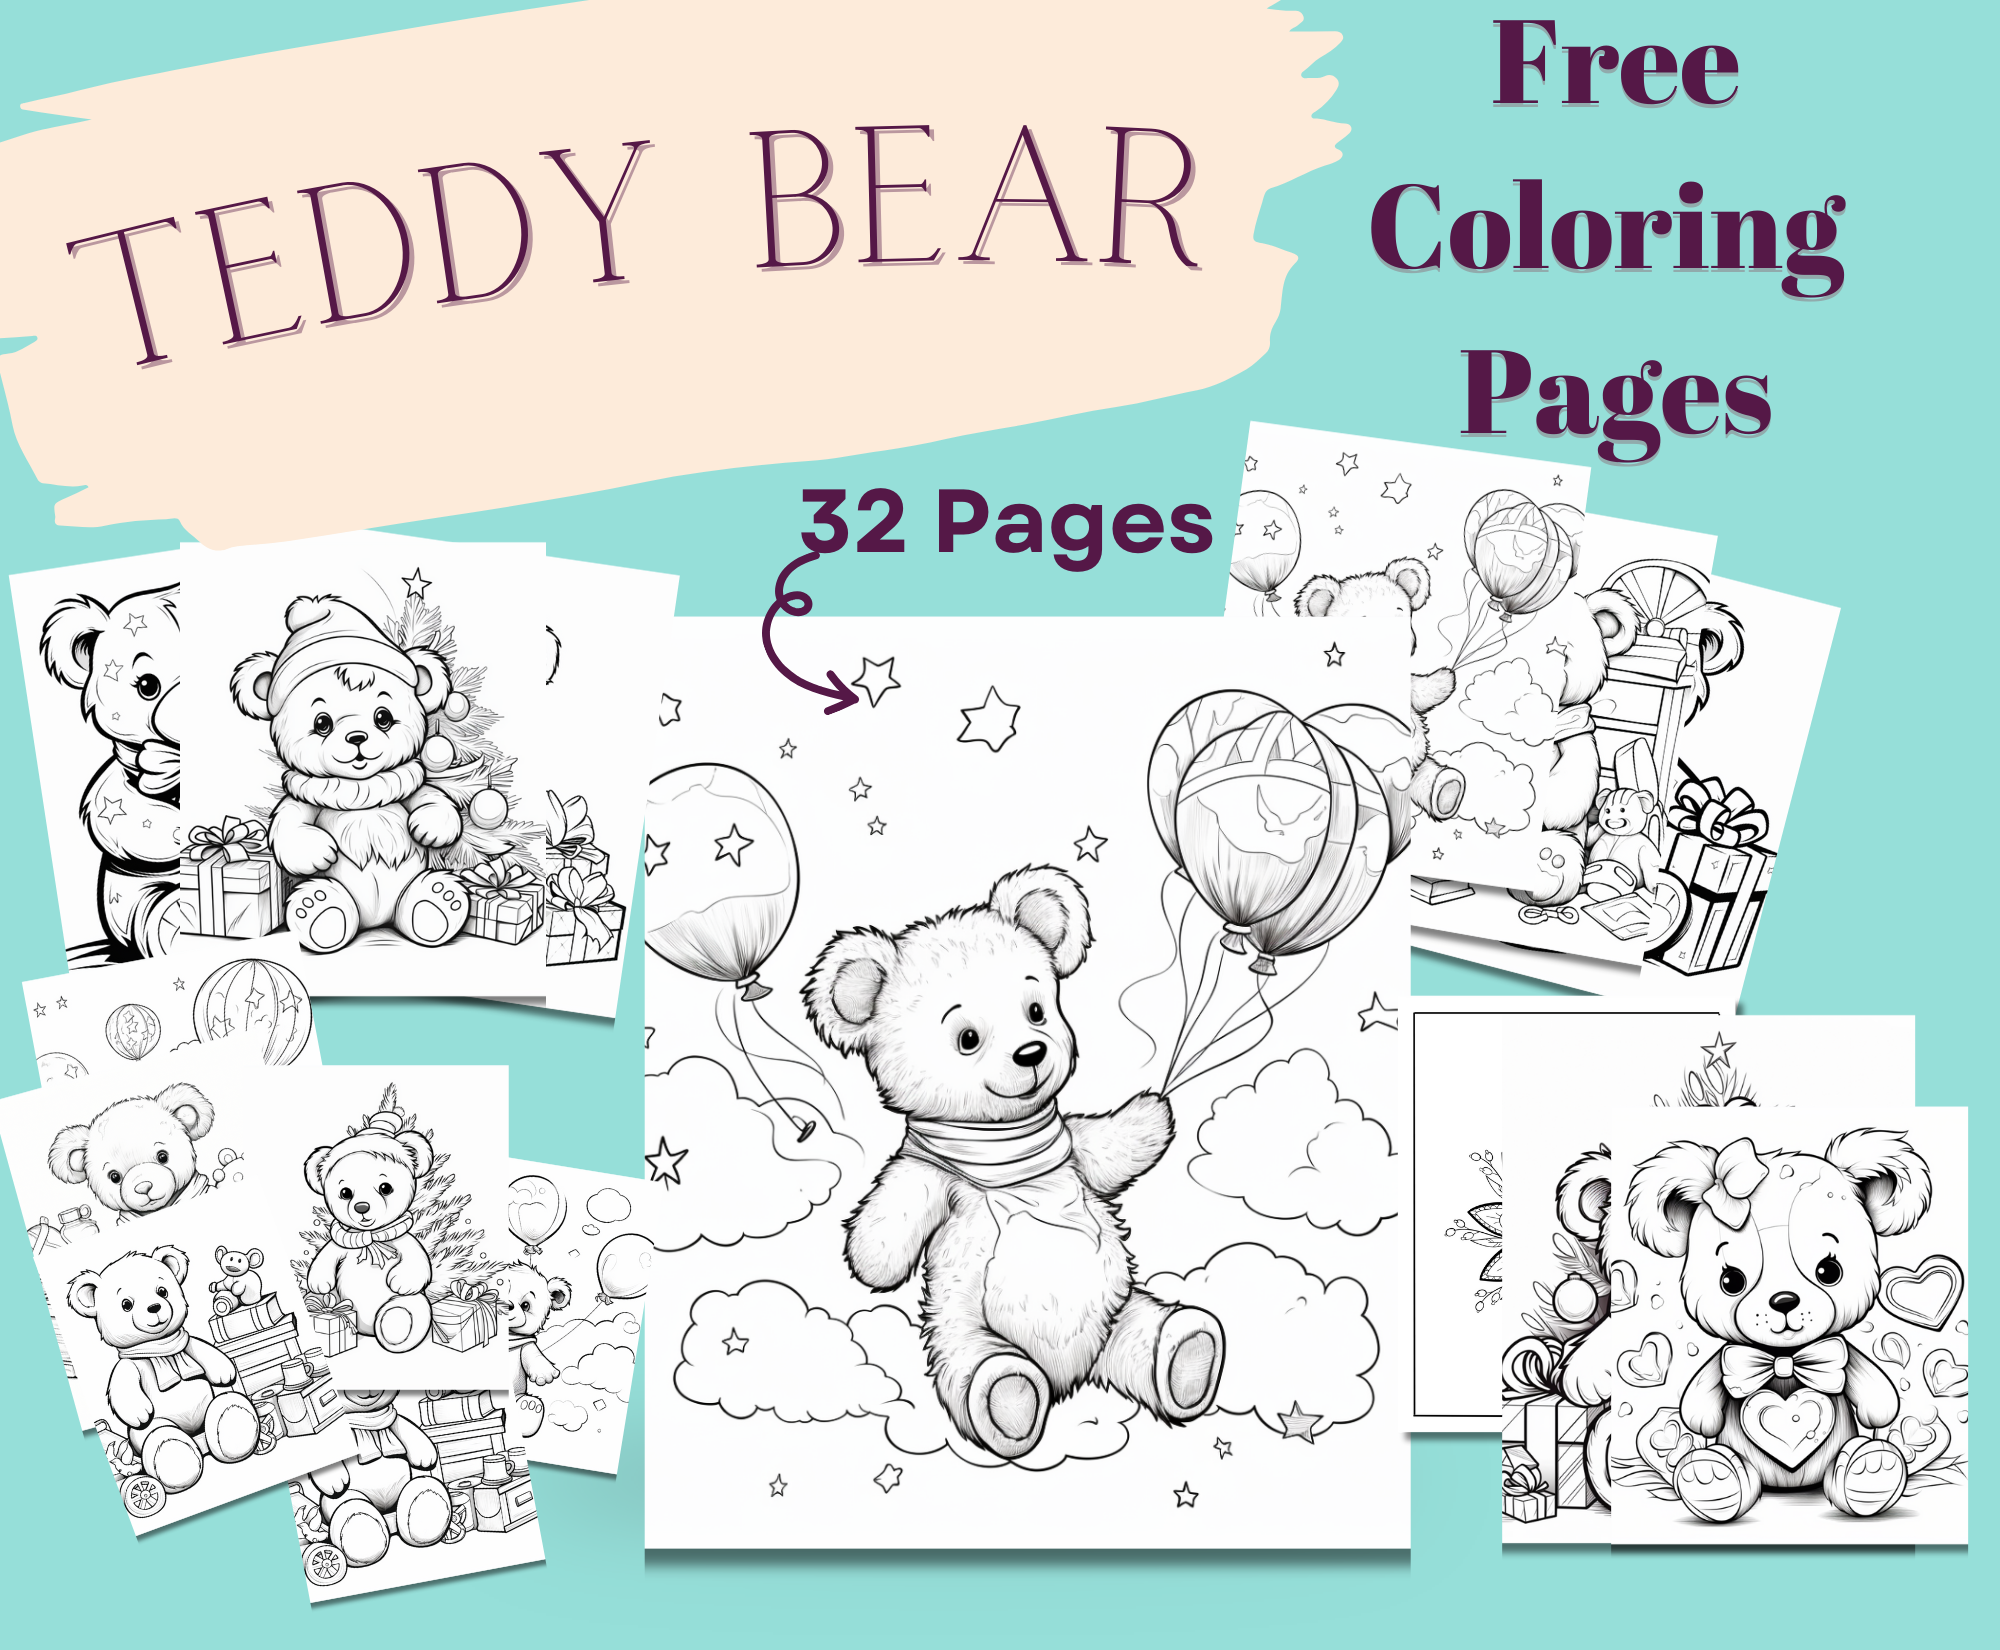 32 Free Teddy Bear Coloring Pages (Updated 2023)